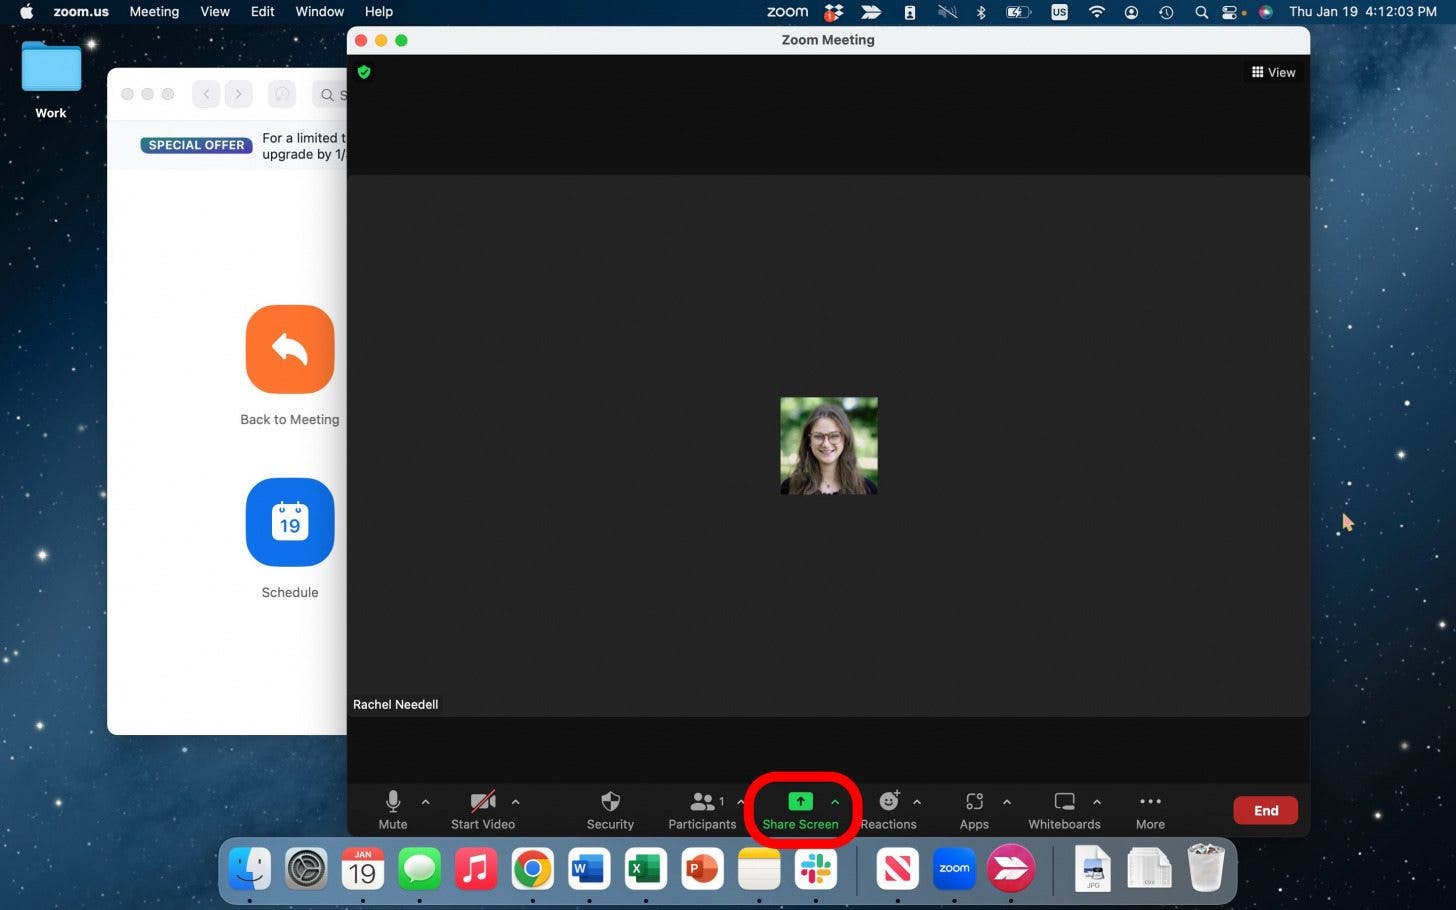 how to share screen in zoom presentation